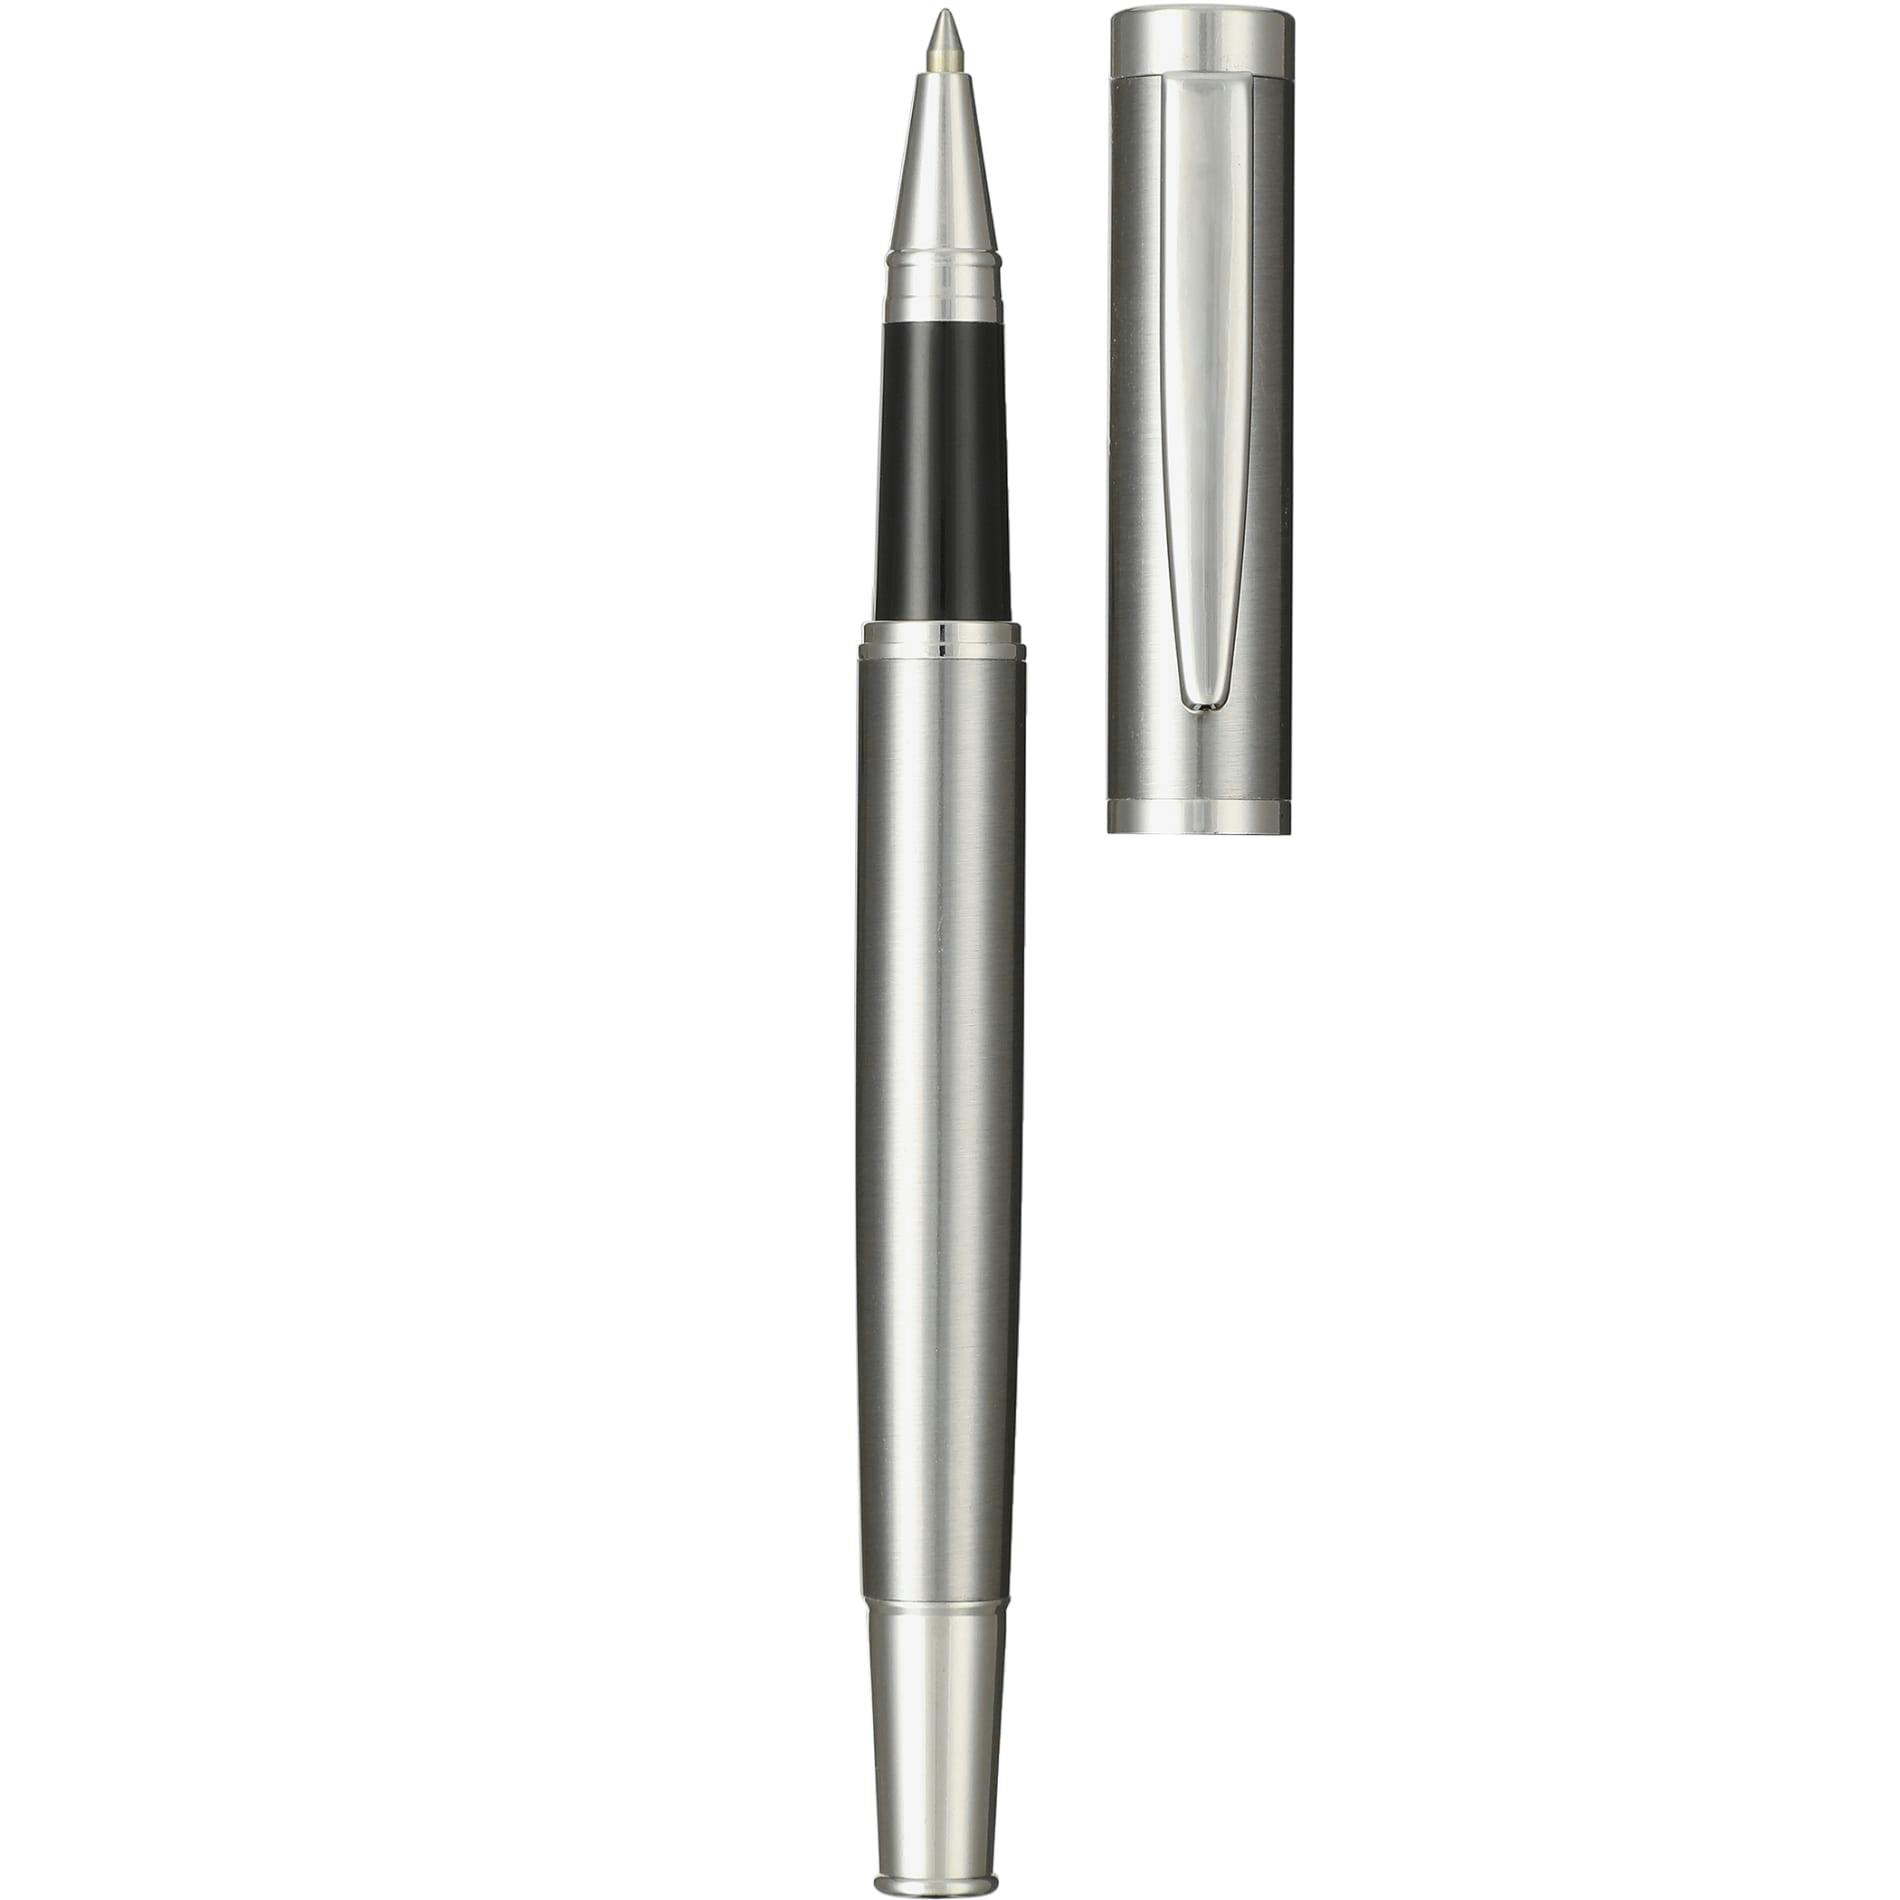 Recycled Stainless Steel Rollerball Pen - additional Image 4